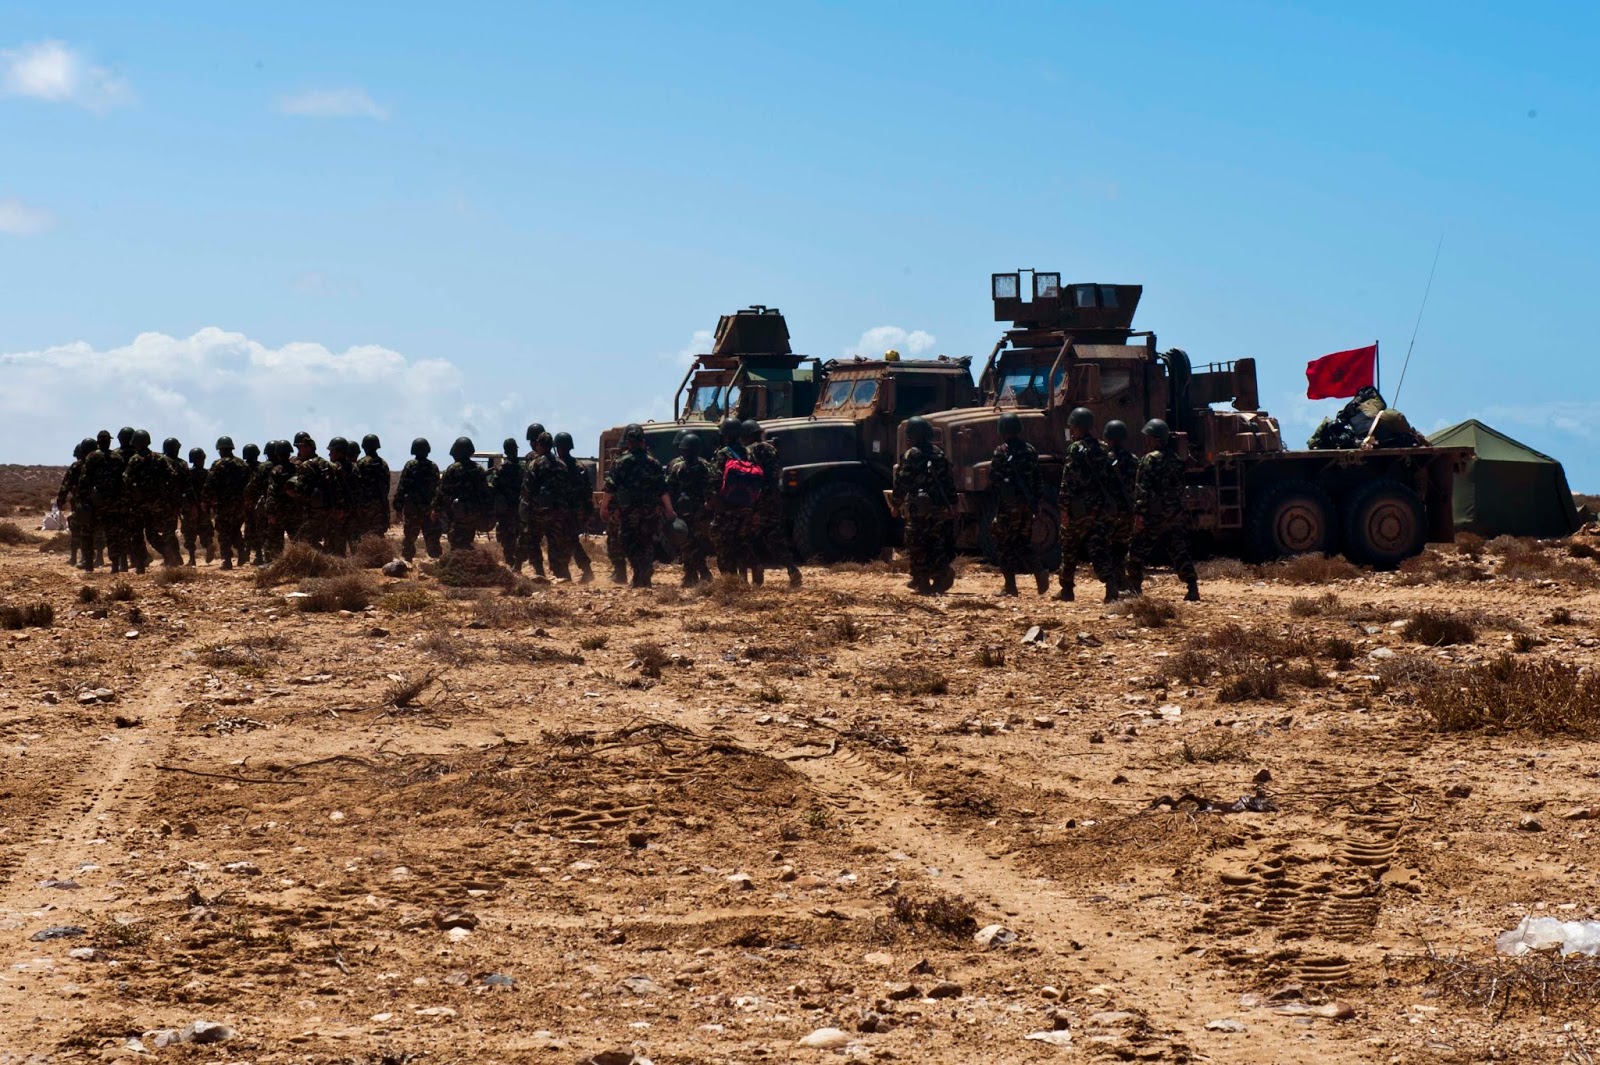 Members_of_the_Royal_Moroccan_Armed_Forces_prepare_to_train_with_U.S._Marines_assigned_to_the_24th_Marine_Expeditionary_Unit_%28MEU%29_April_12,_2012,_on_a_beach_in_Cap_Draa,_Morocco_120412-N-QM601-25.jpg